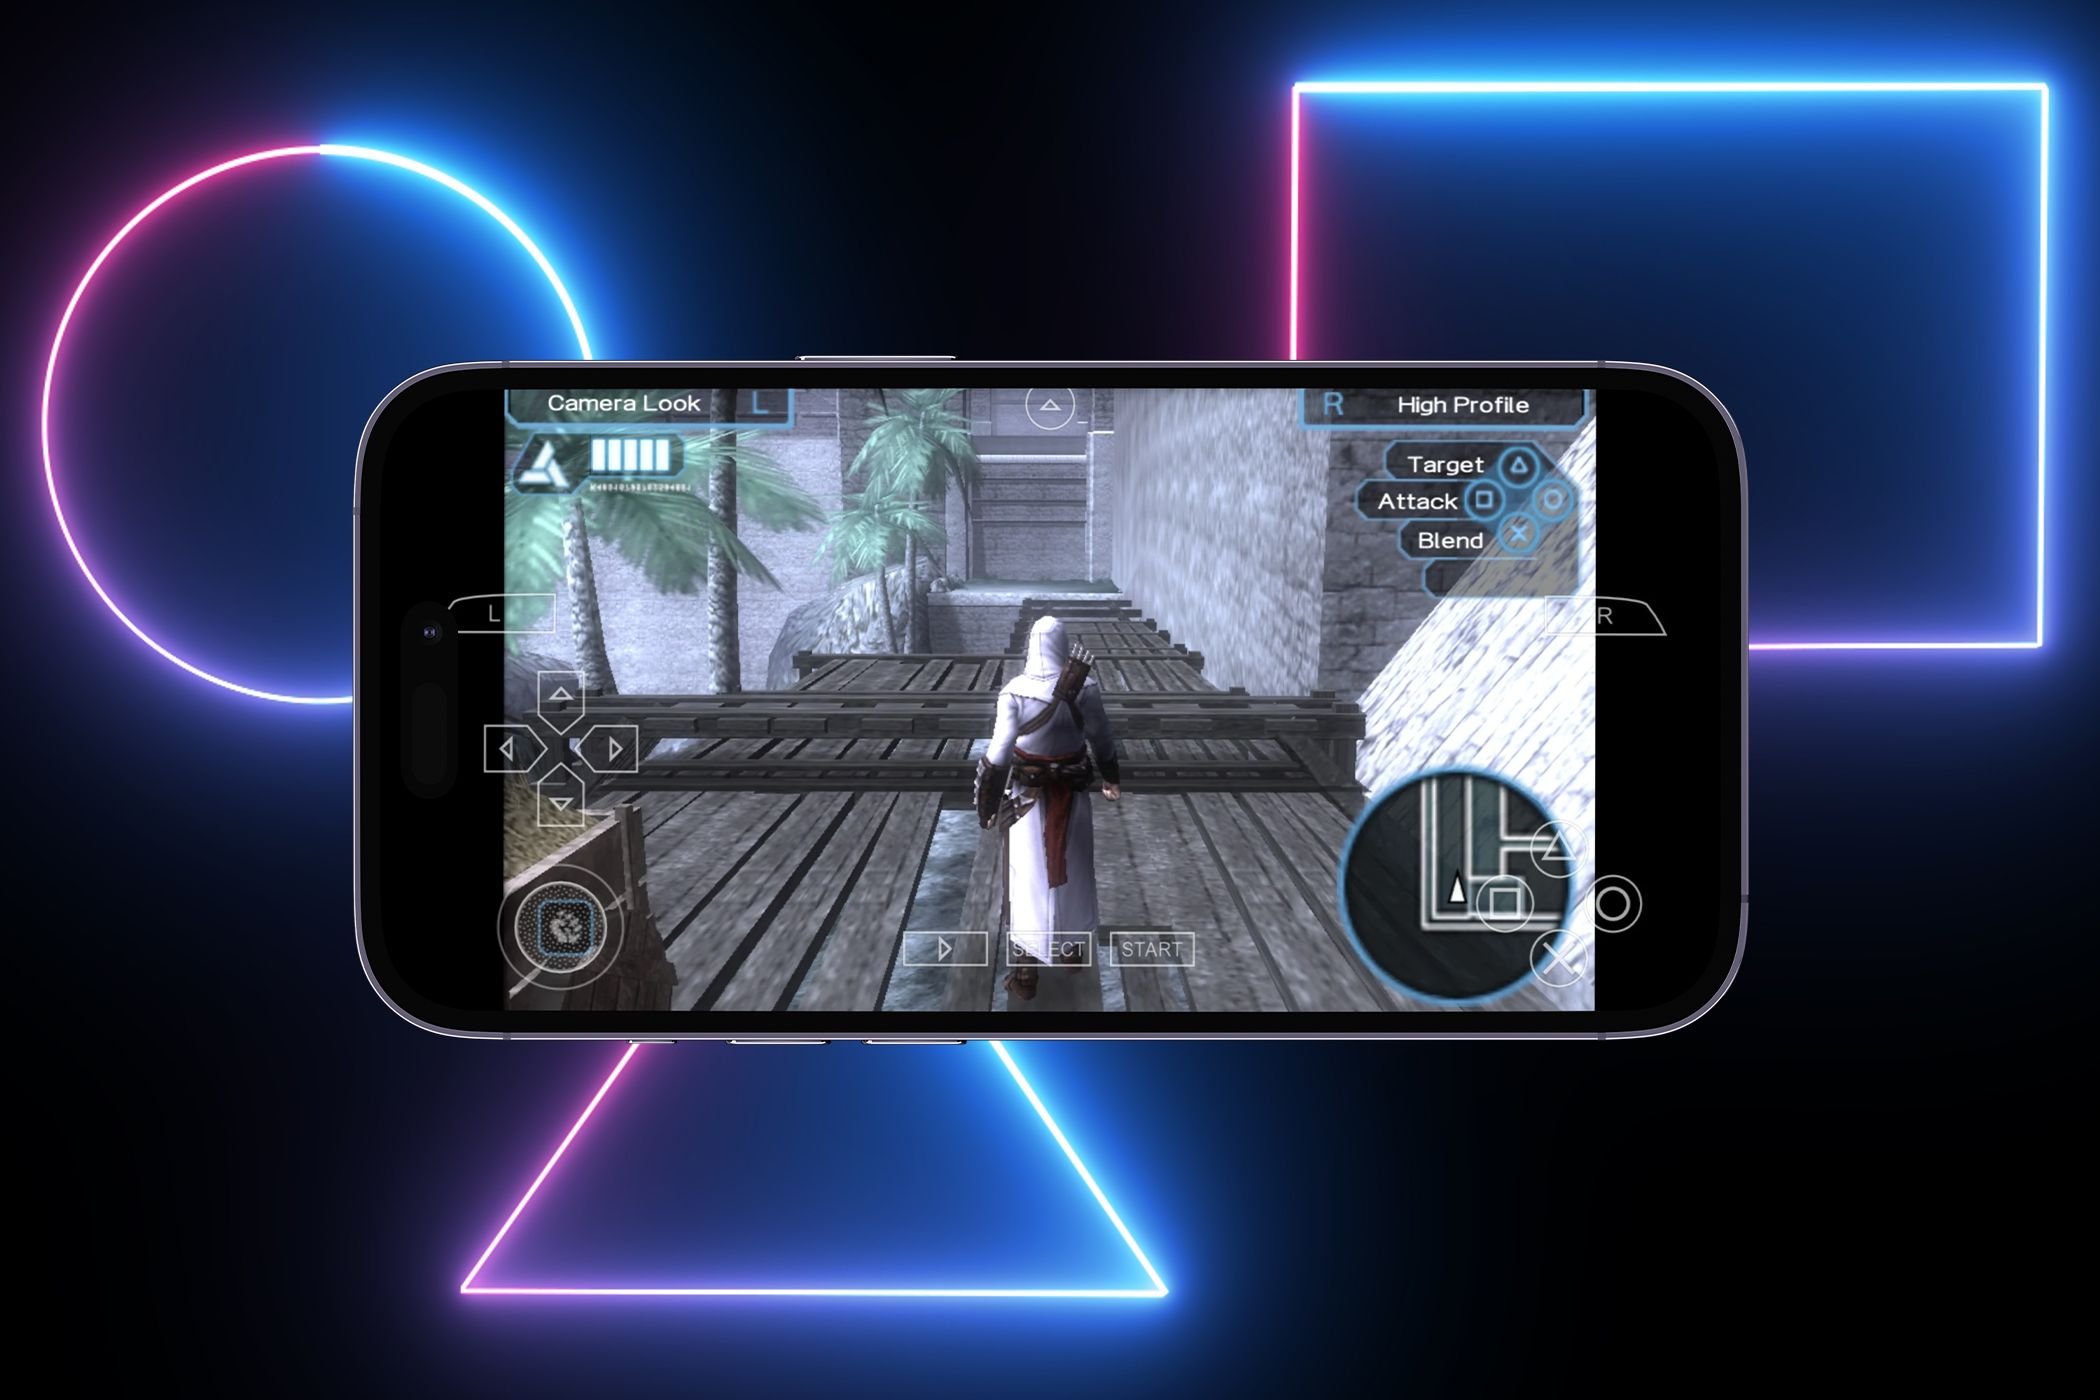 Assassins Creed Bloodines emulated using PPSSPP on an iPhone with PS icons in the background